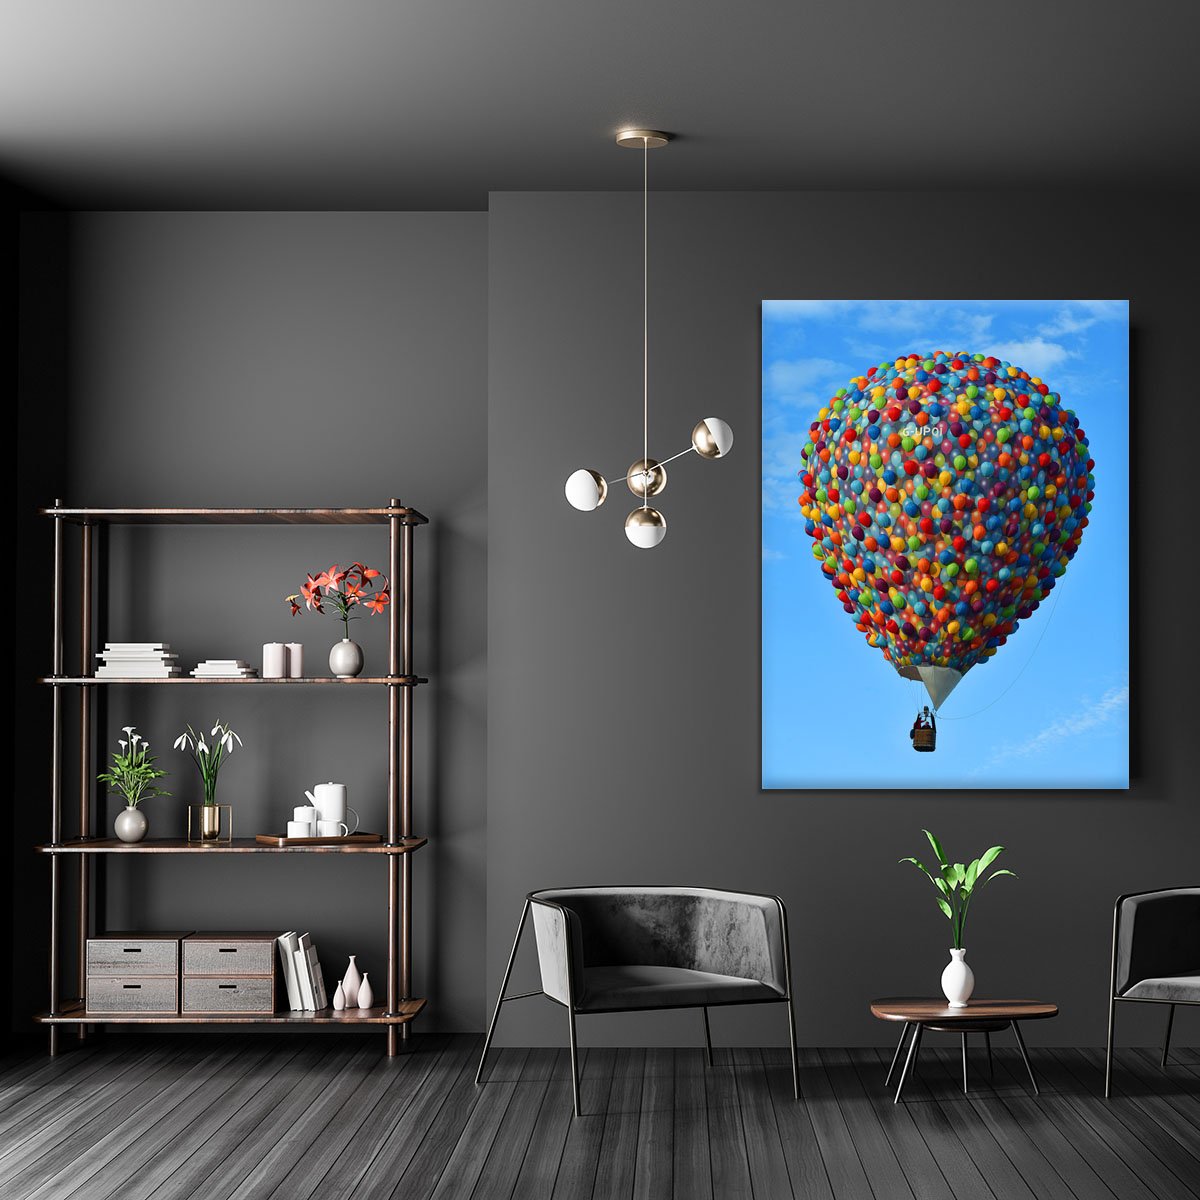 Balloon made of balloons Canvas Print or Poster